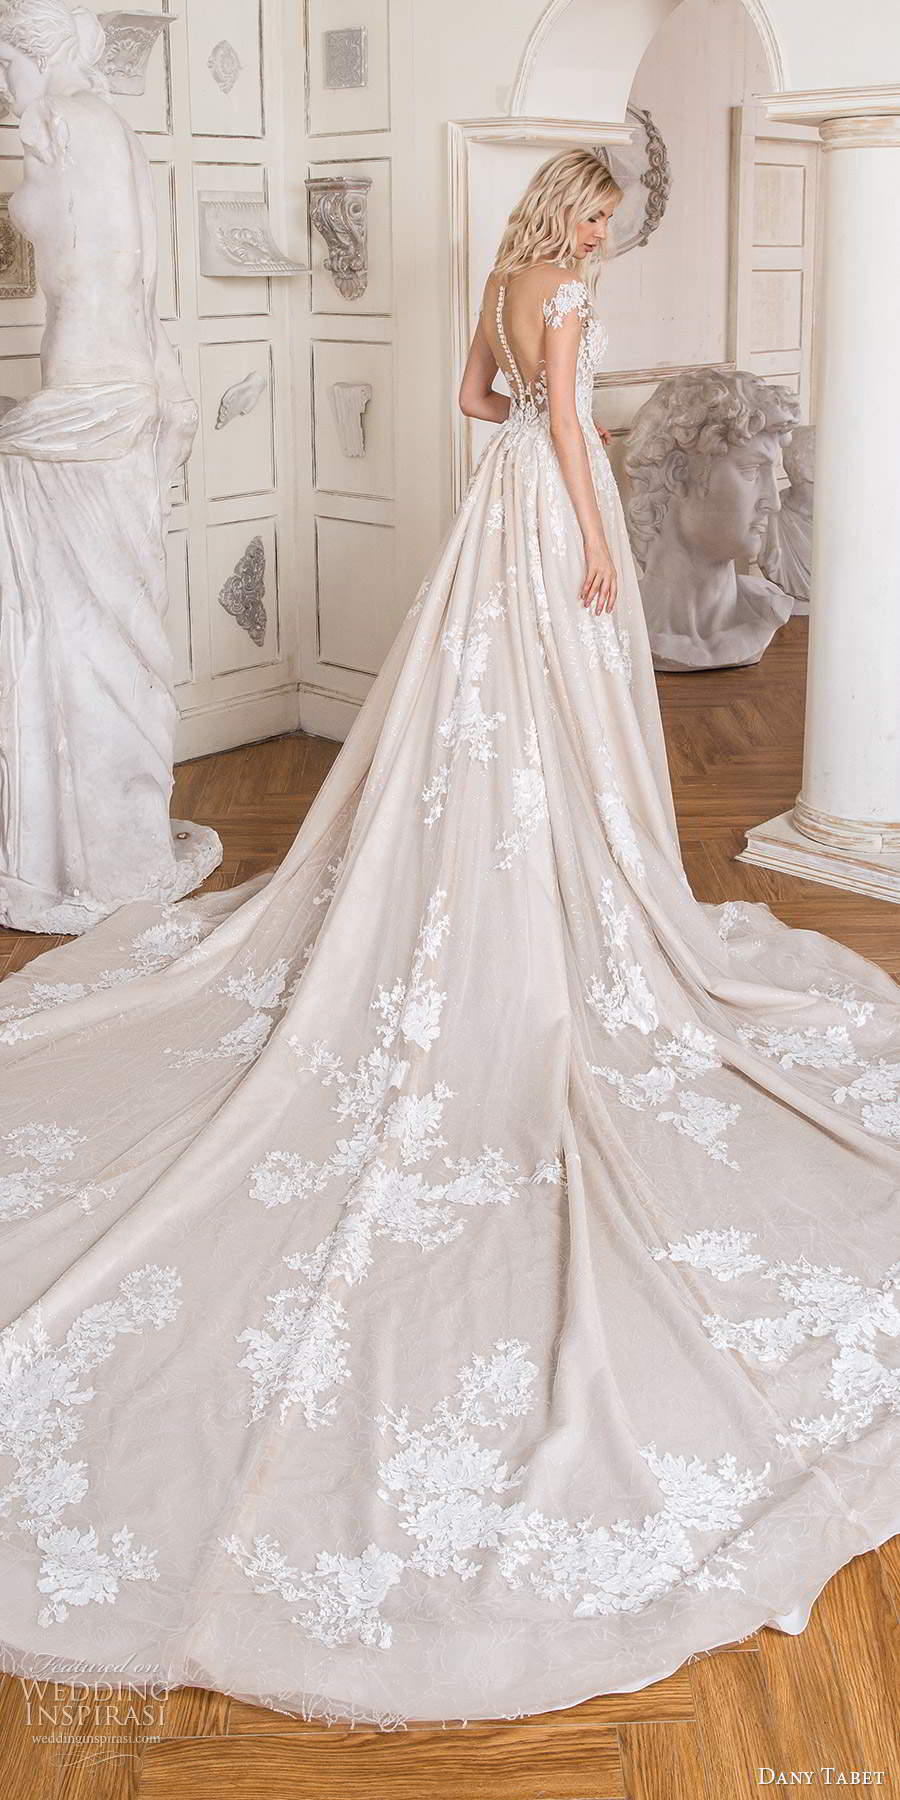 dany tabet 2020 bridal illusion cap sleeves plunging sweetheart neckline fully embellished a line ball gown wedding dress cathedral train (19) bv